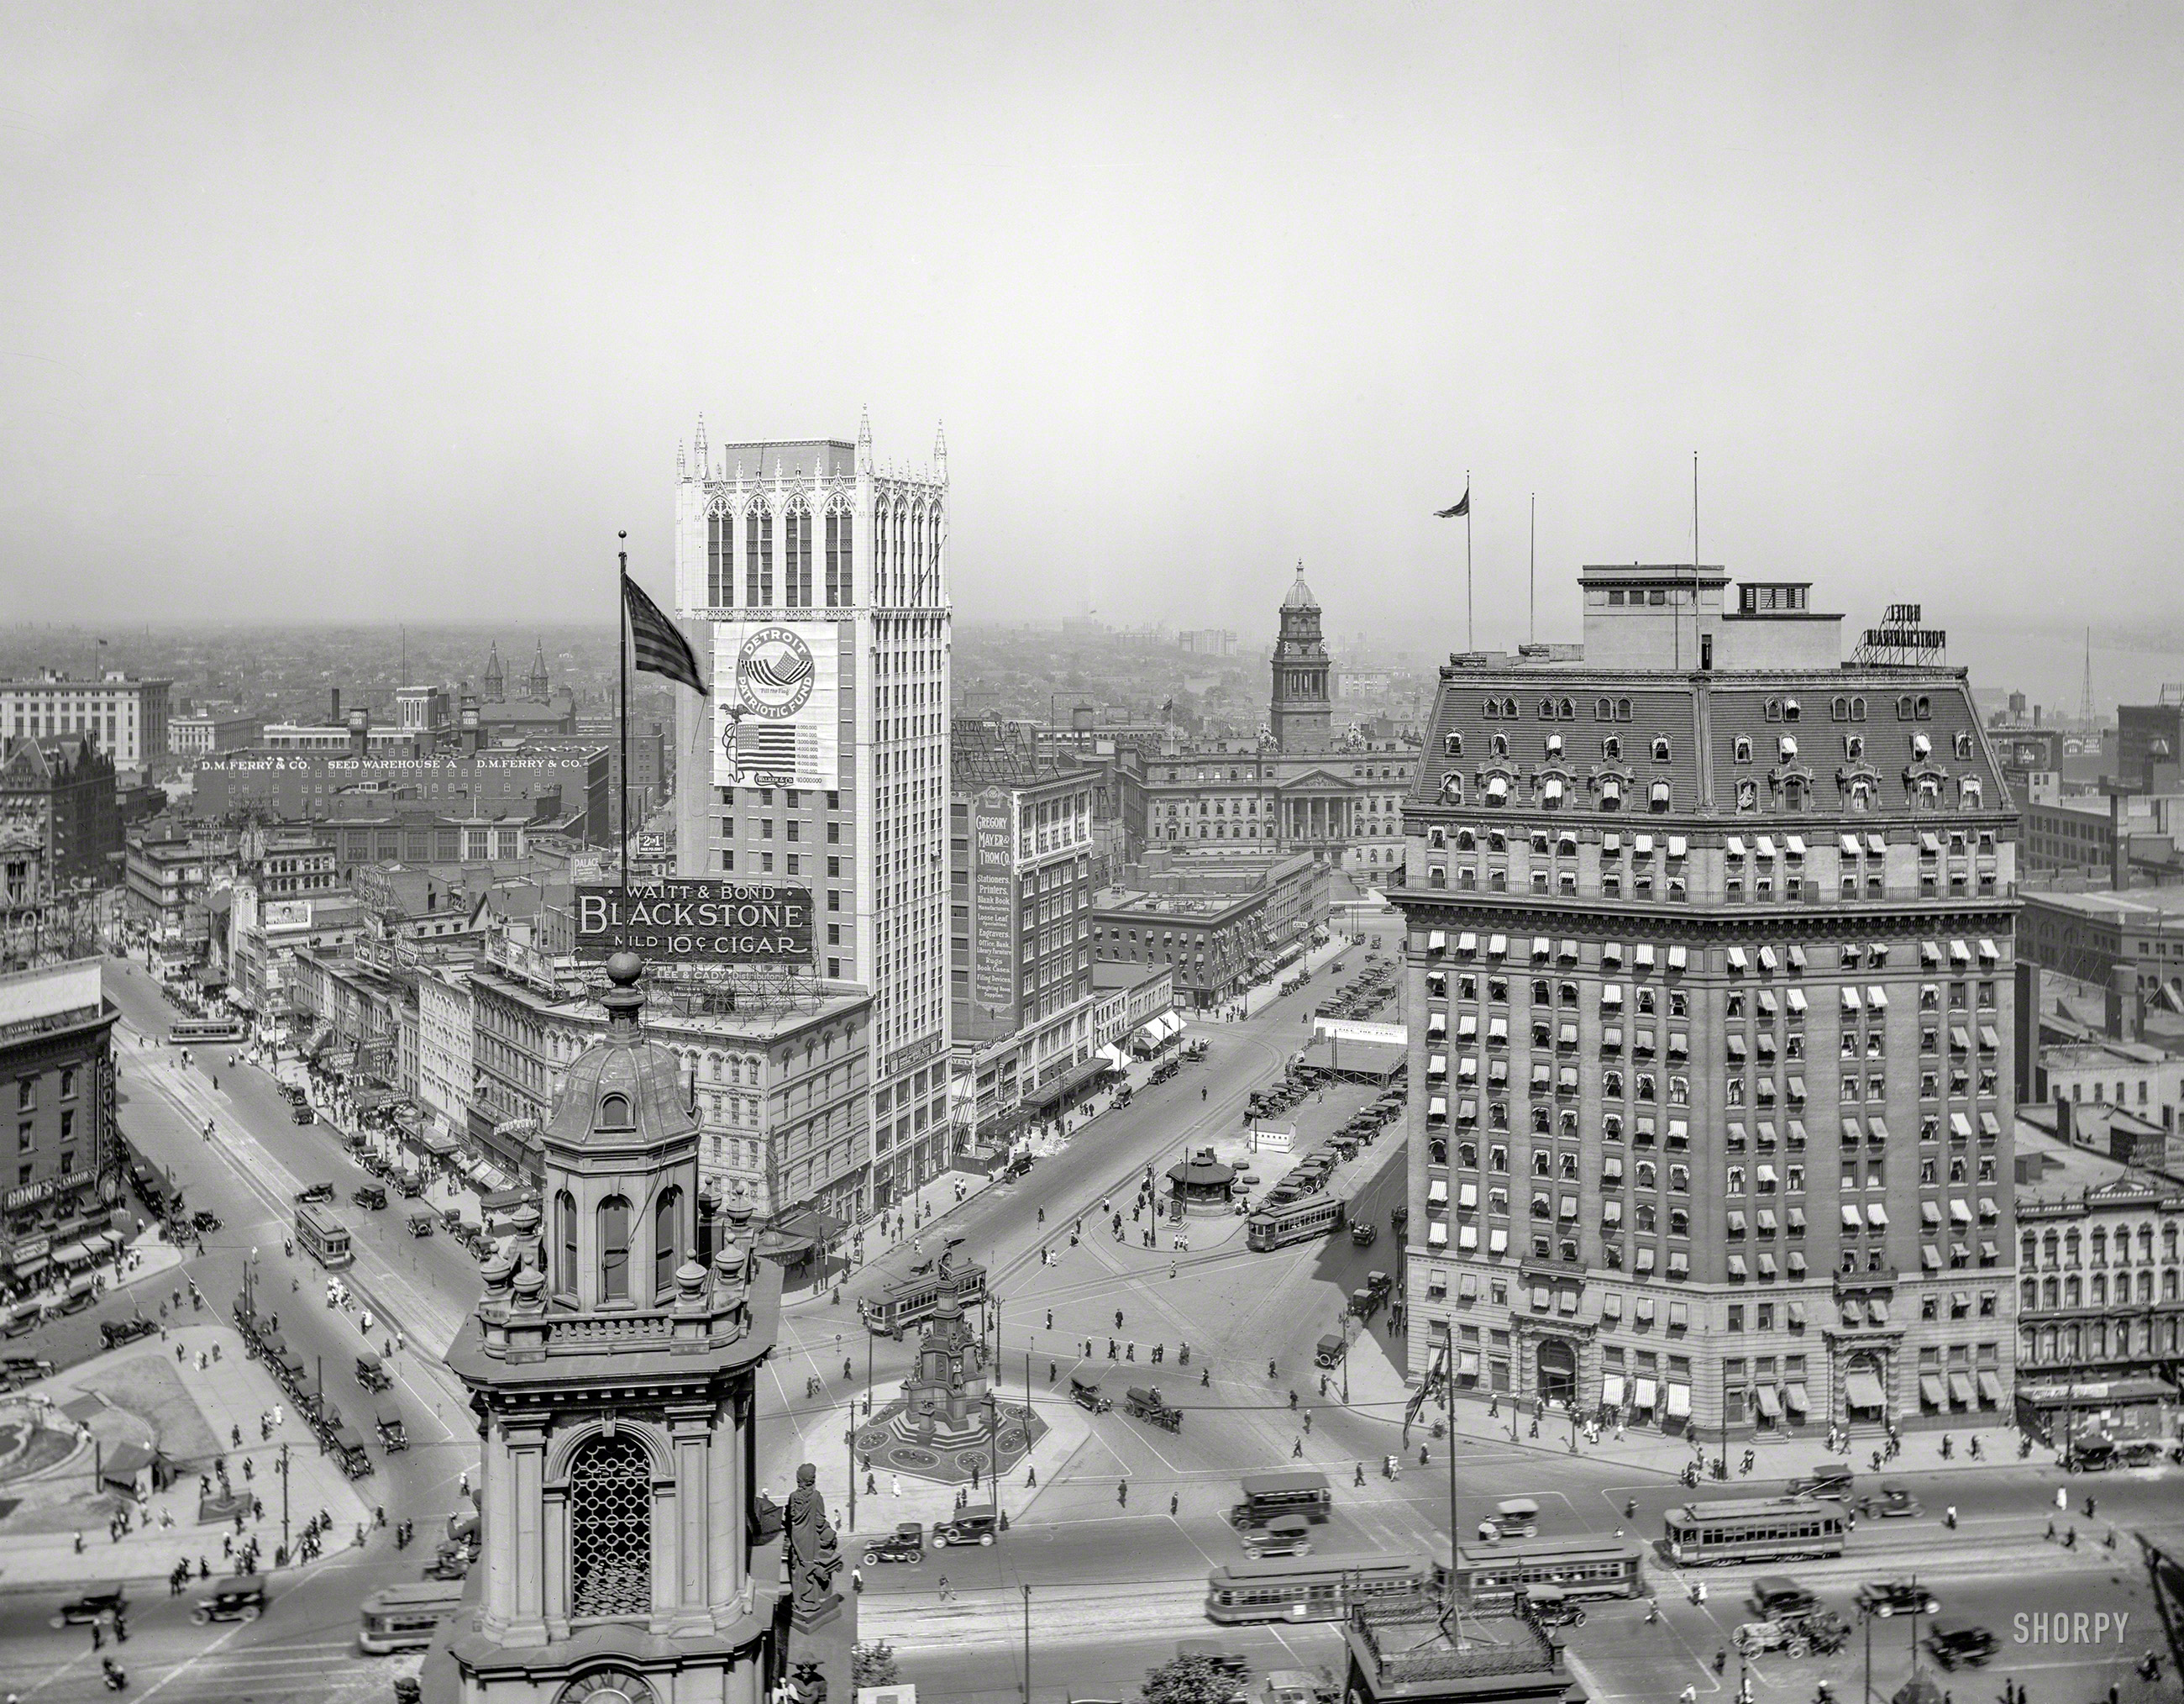 Circa 1918. "The heart of Detroit." An aerial view of the Campus Martius from the Dime Bank, taking in landmarks including Detroit City Hall in the foreground, the Real Estate Exchange, Soldiers' and Sailors' Monument, Hotel Pontchartrain, Wayne County Building, Cadillac Square and the Cadillac Chair. 8x10 glass negative, Detroit Publishing Co. View full size.